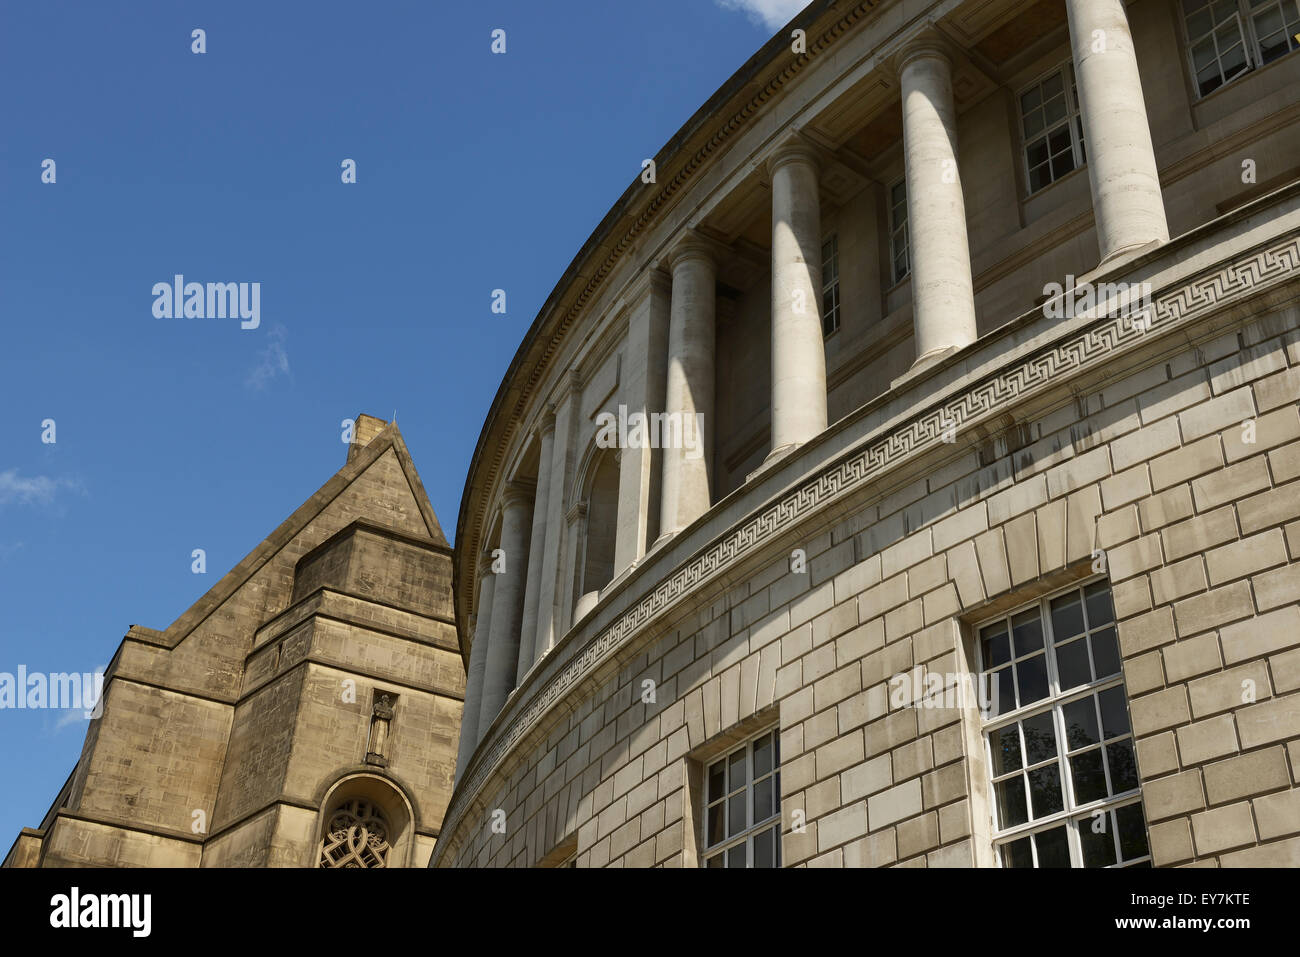 A close up detail of the exterior of Manchester Central Library in Manchester city centre UK Stock Photo